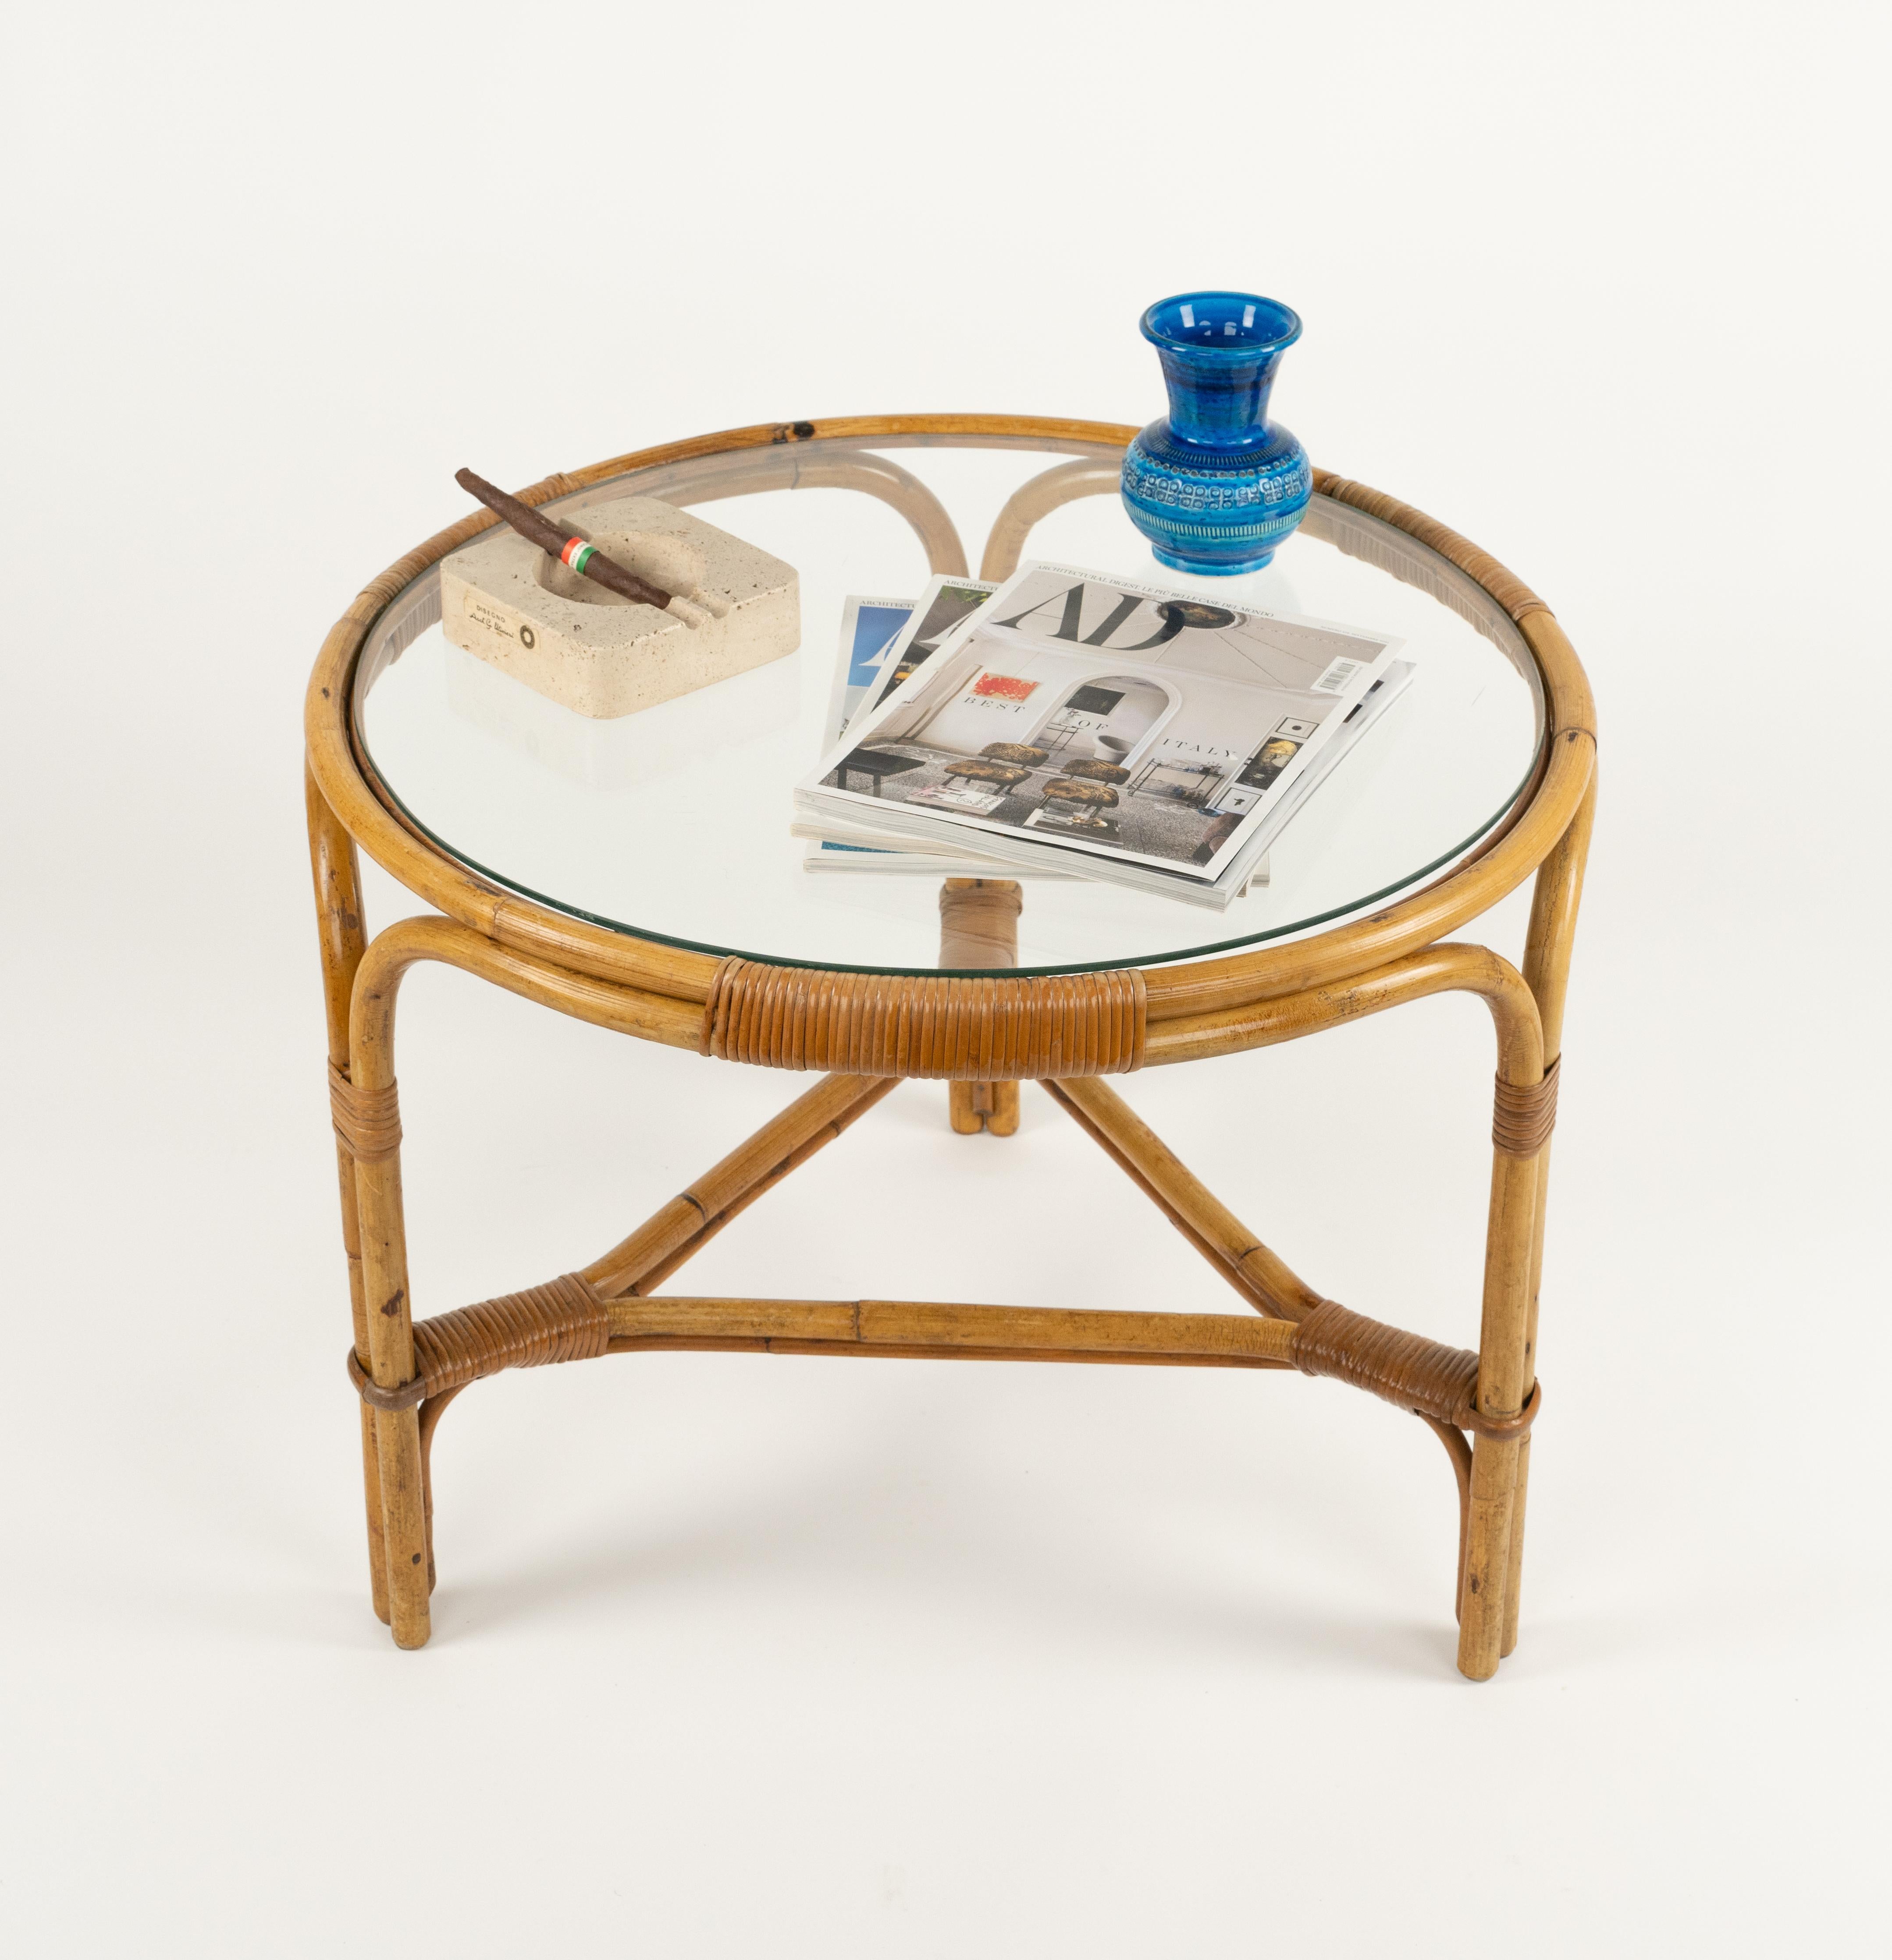 Midcentury Round Coffee Table in Bamboo, Rattan and Glass, Italy 1960s For Sale 5